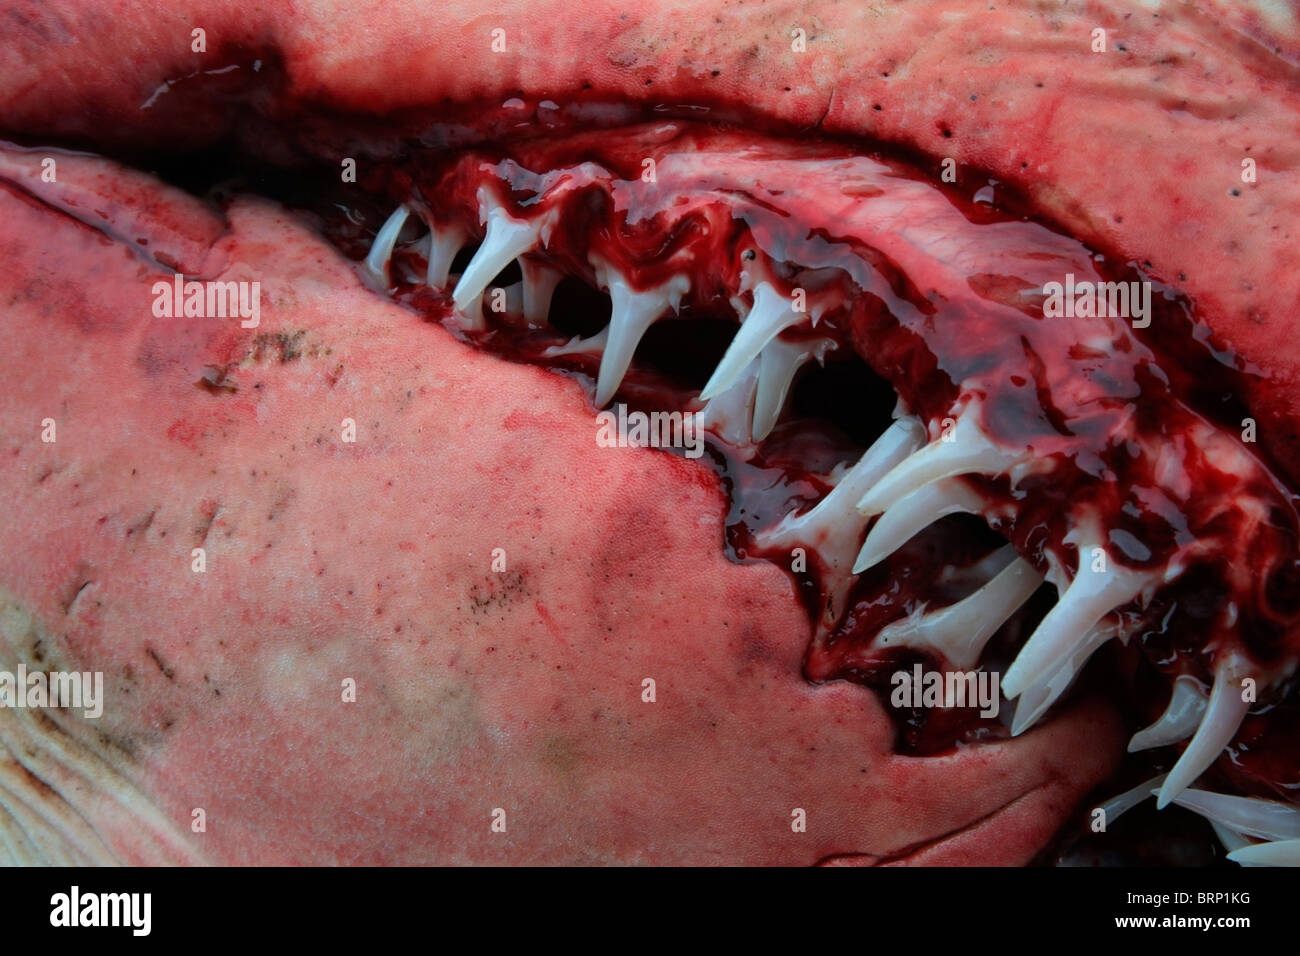 Detail of Ragged Tooth Shark's mouth prior to dissection. Stock Photo